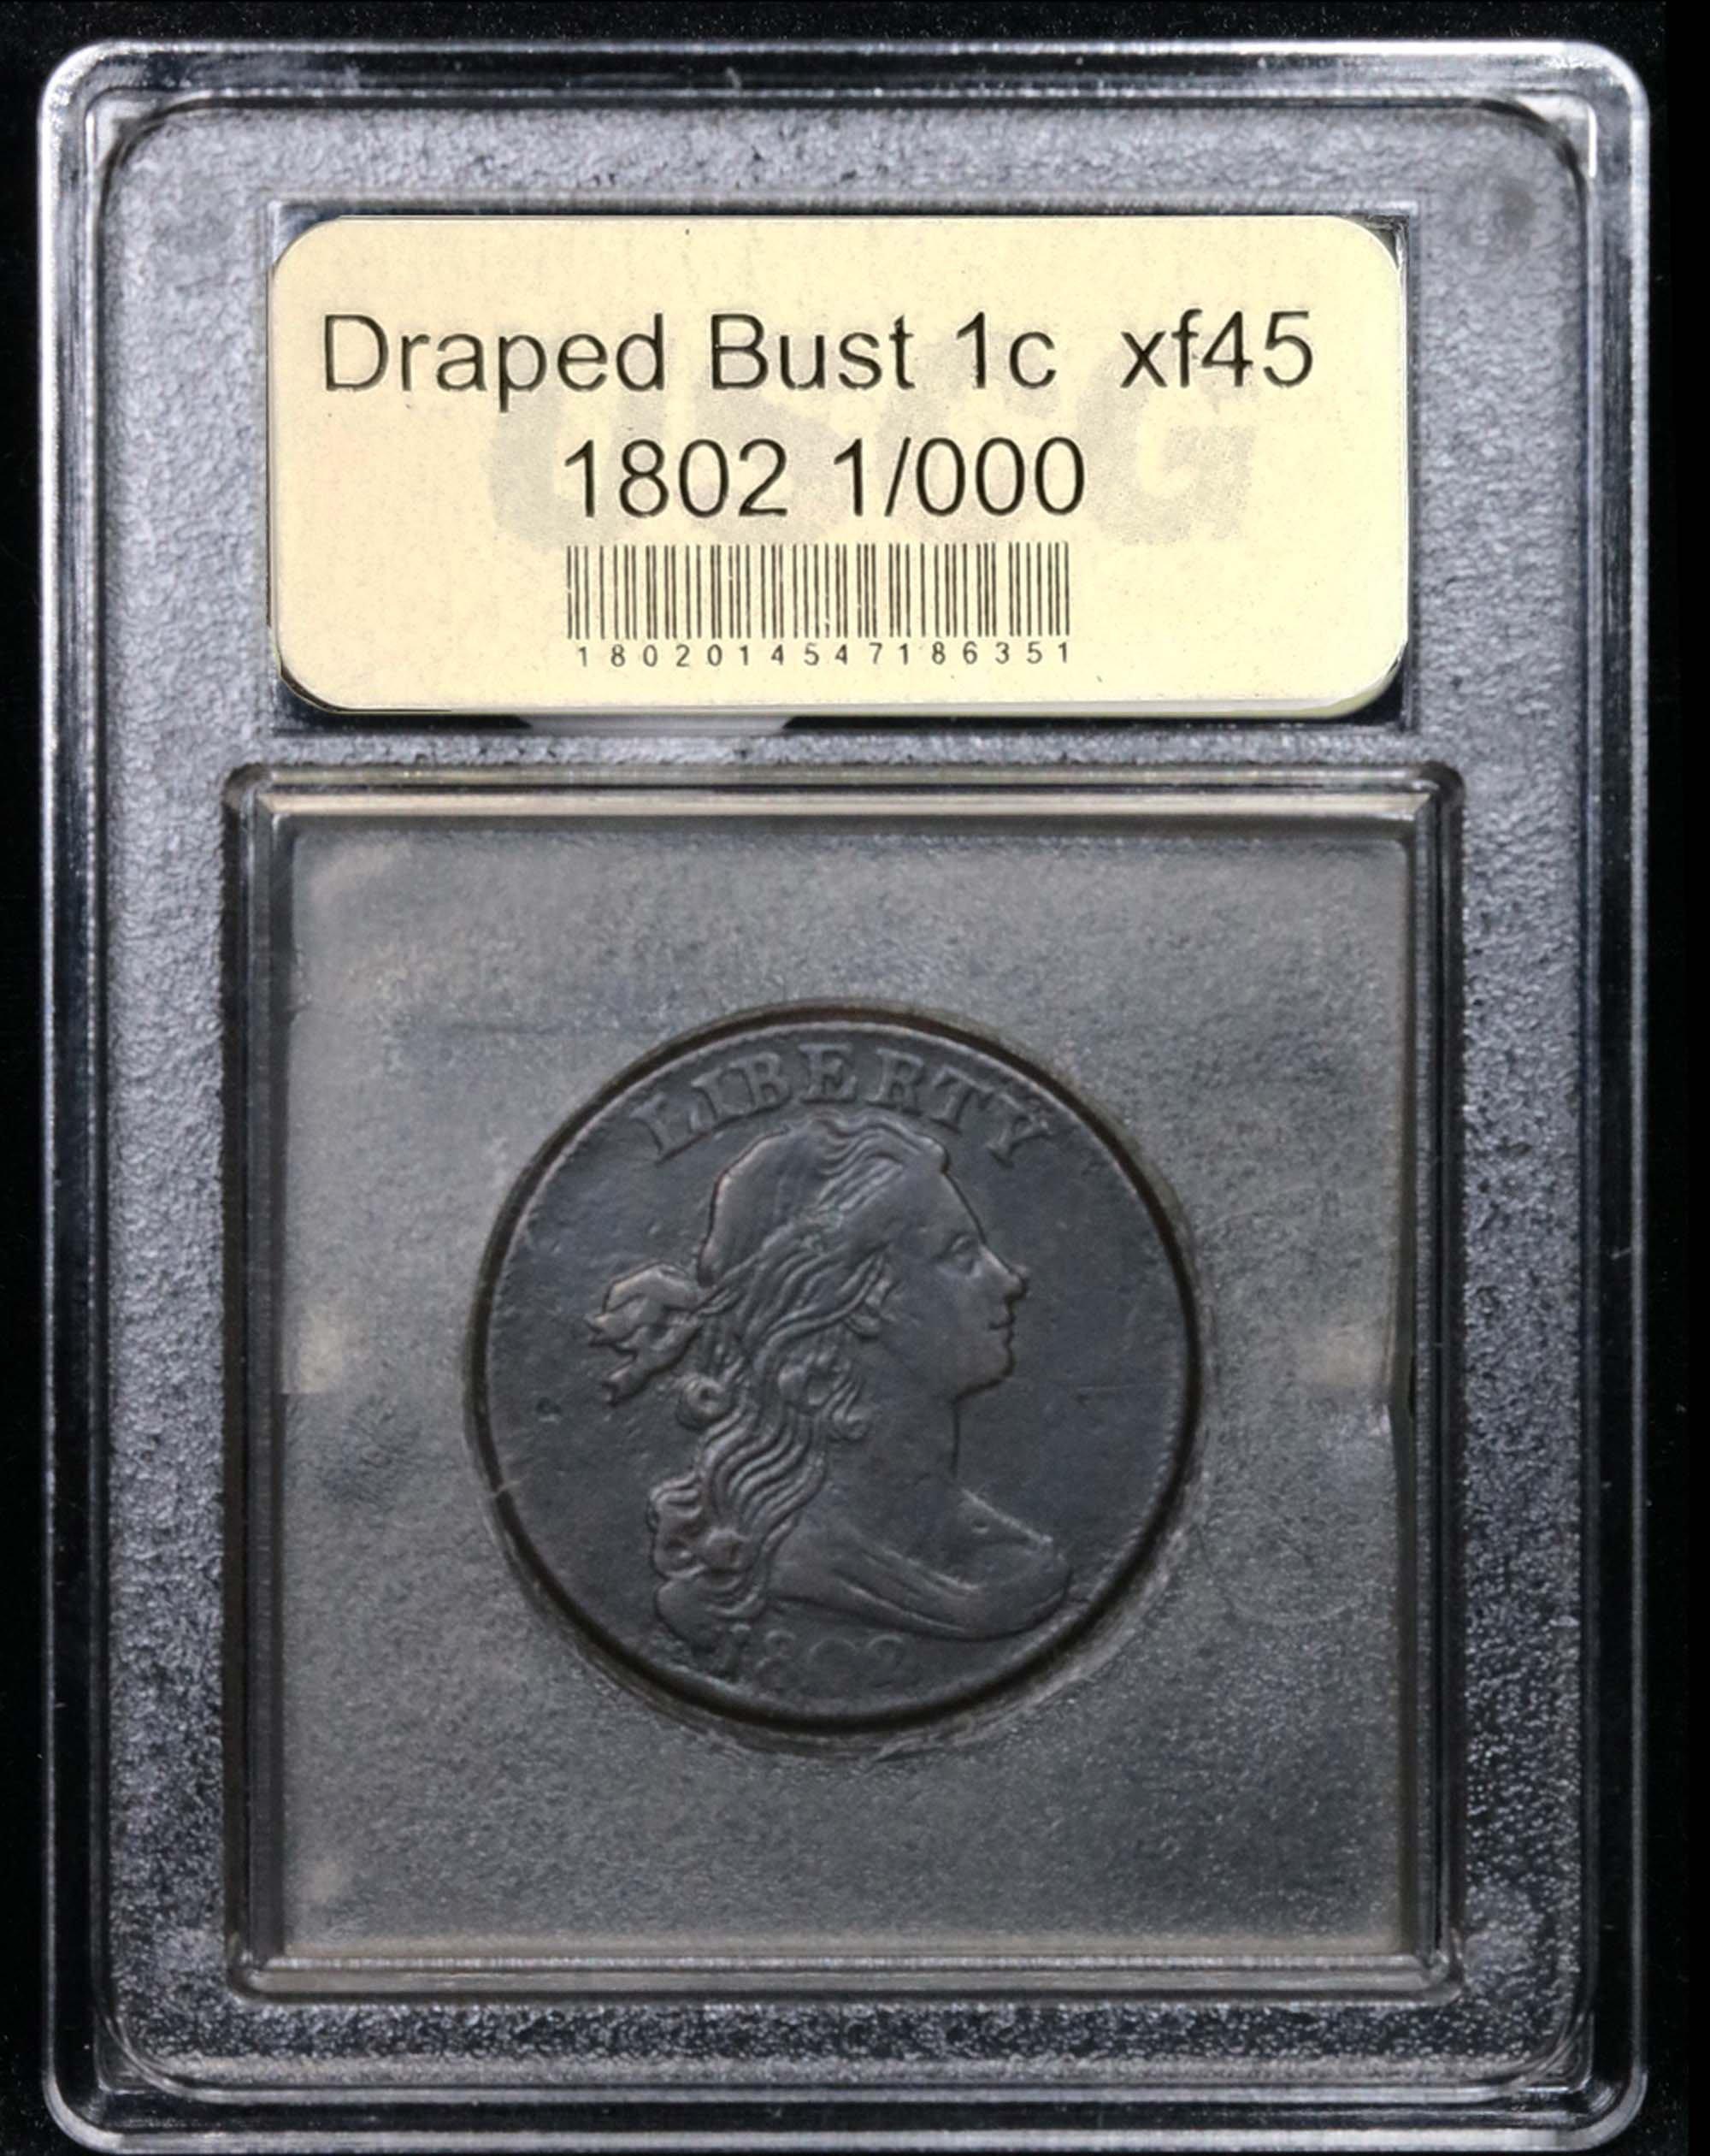 ***Auction Highlight*** 1802 1/000 Draped Bust Large Cent 1c Graded xf+ by USCG (fc)